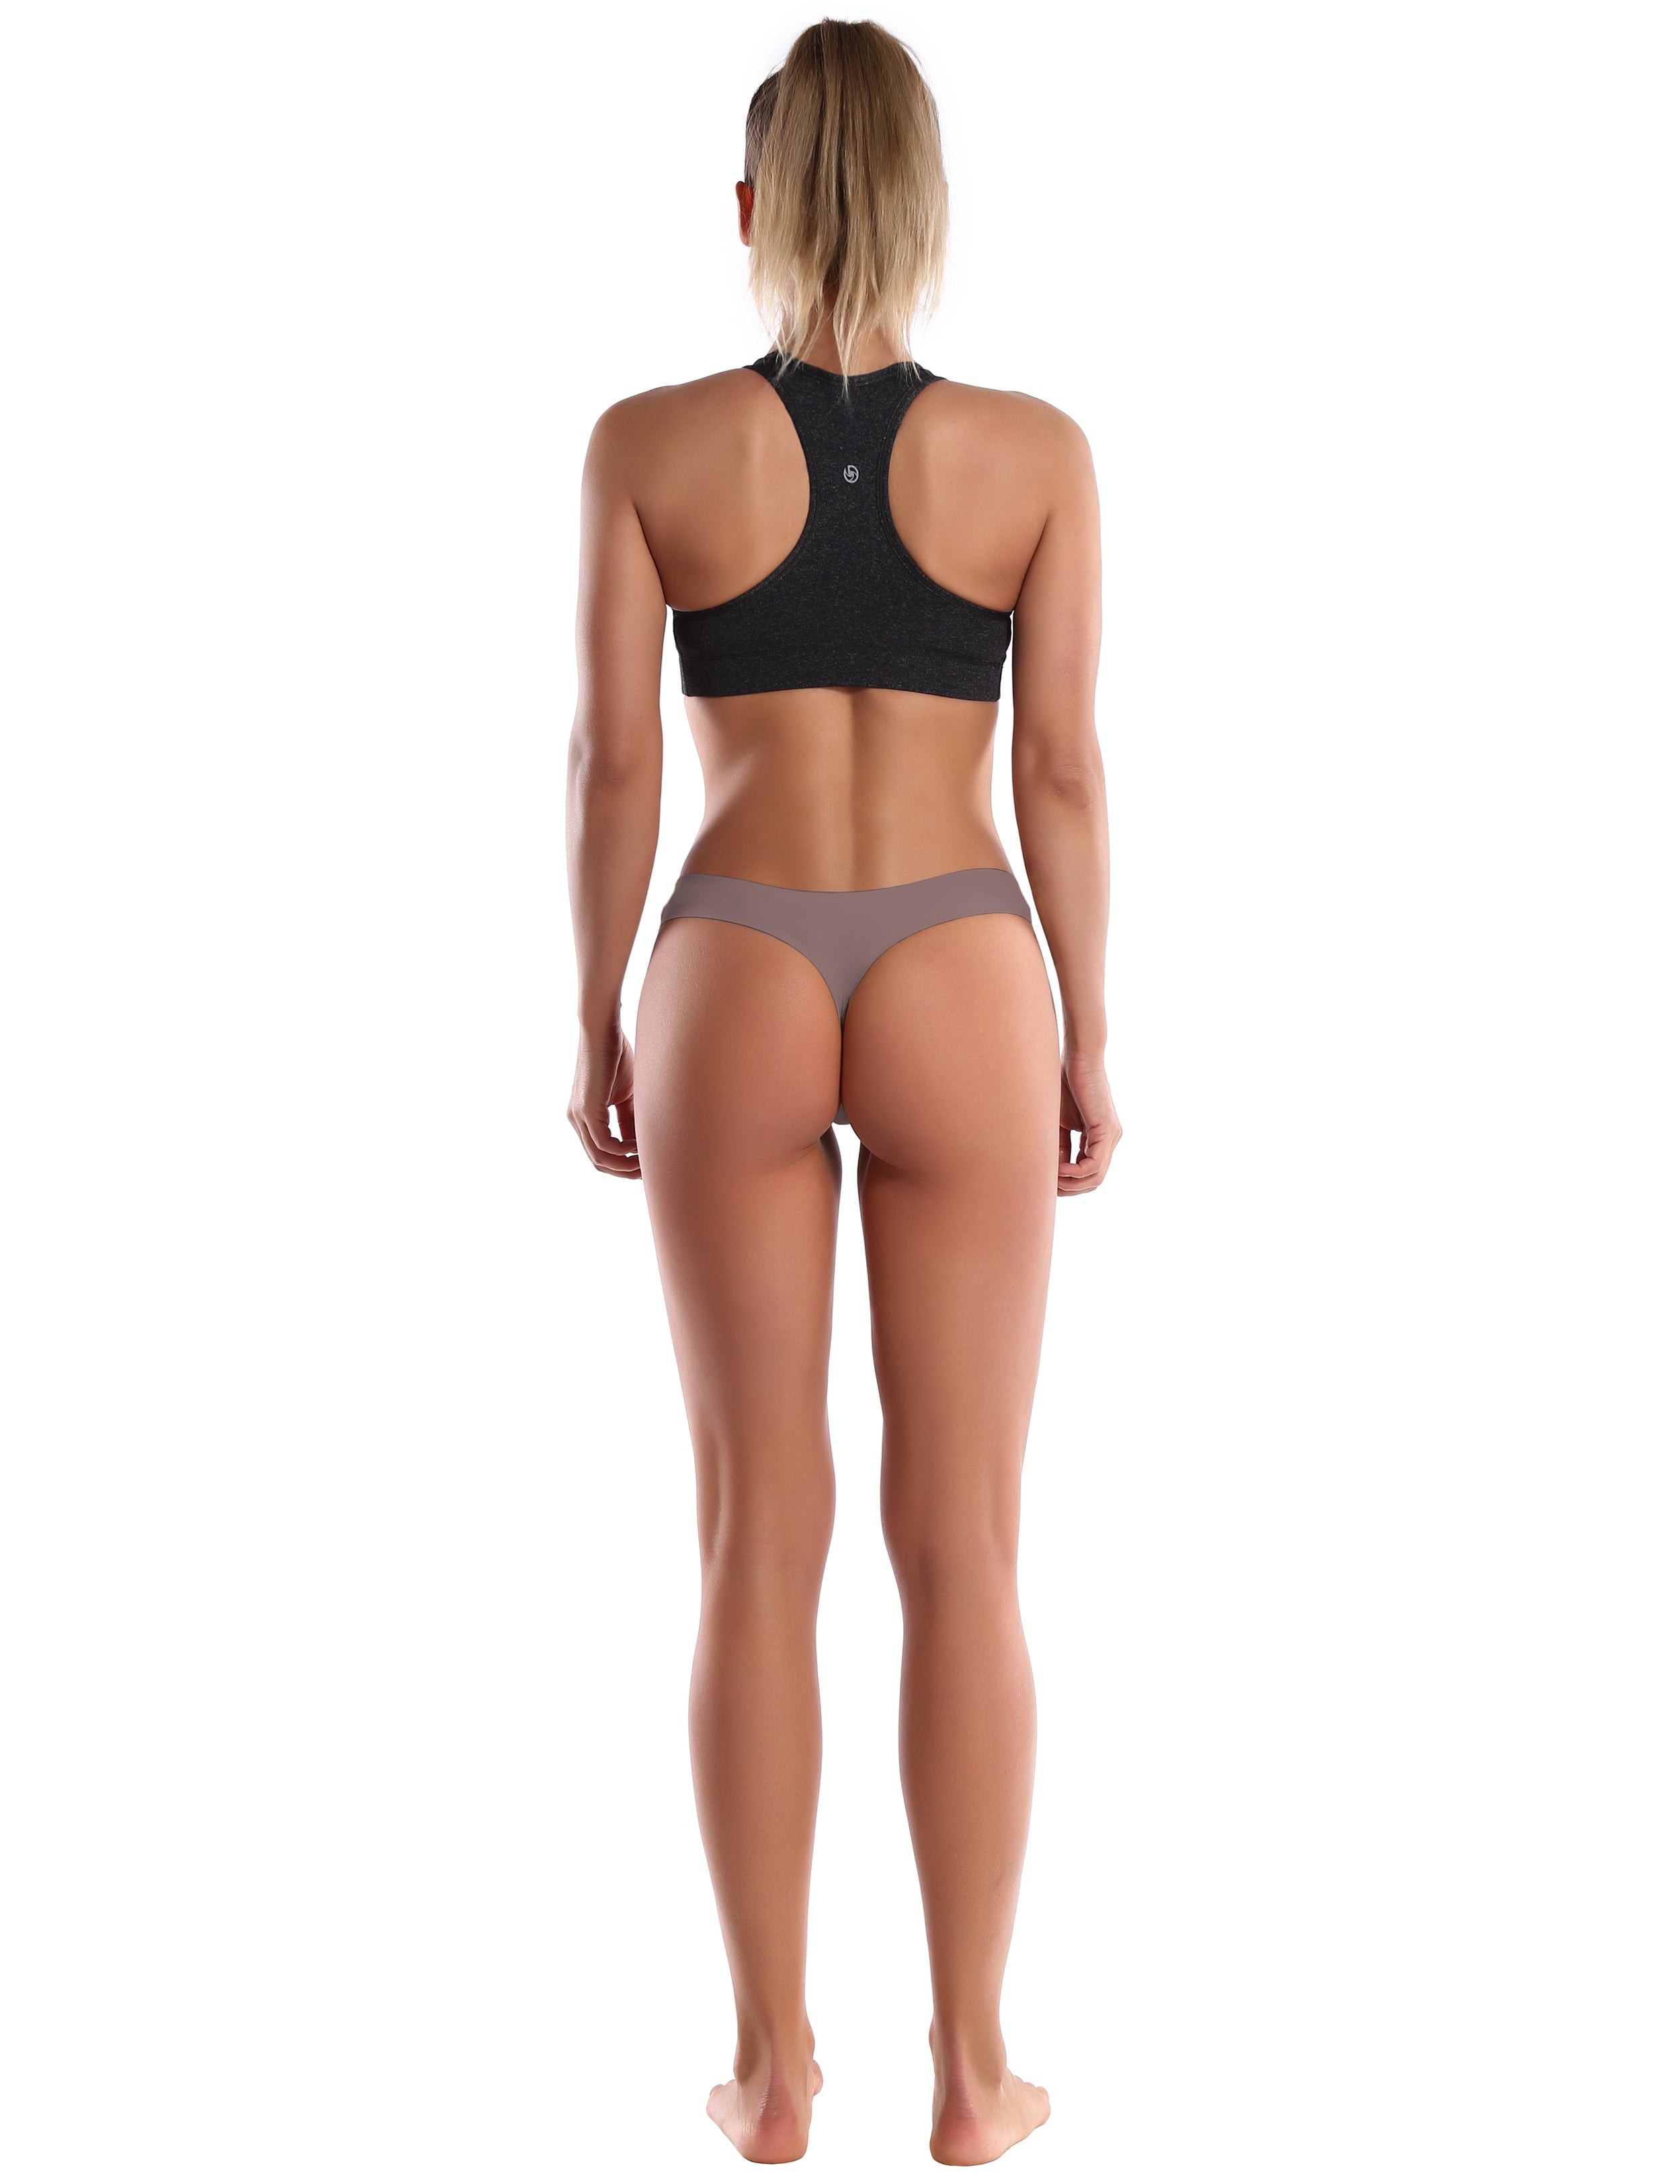 Invisibles Sport Thongs Brown Sleek, soft, smooth and totally comfortable: our newest thongs style is here. High elasticity High density Softest-ever fabric Laser cutting Unsealed Comfortable No panty lines Machine wash 95% Nylon, 5% Spandex